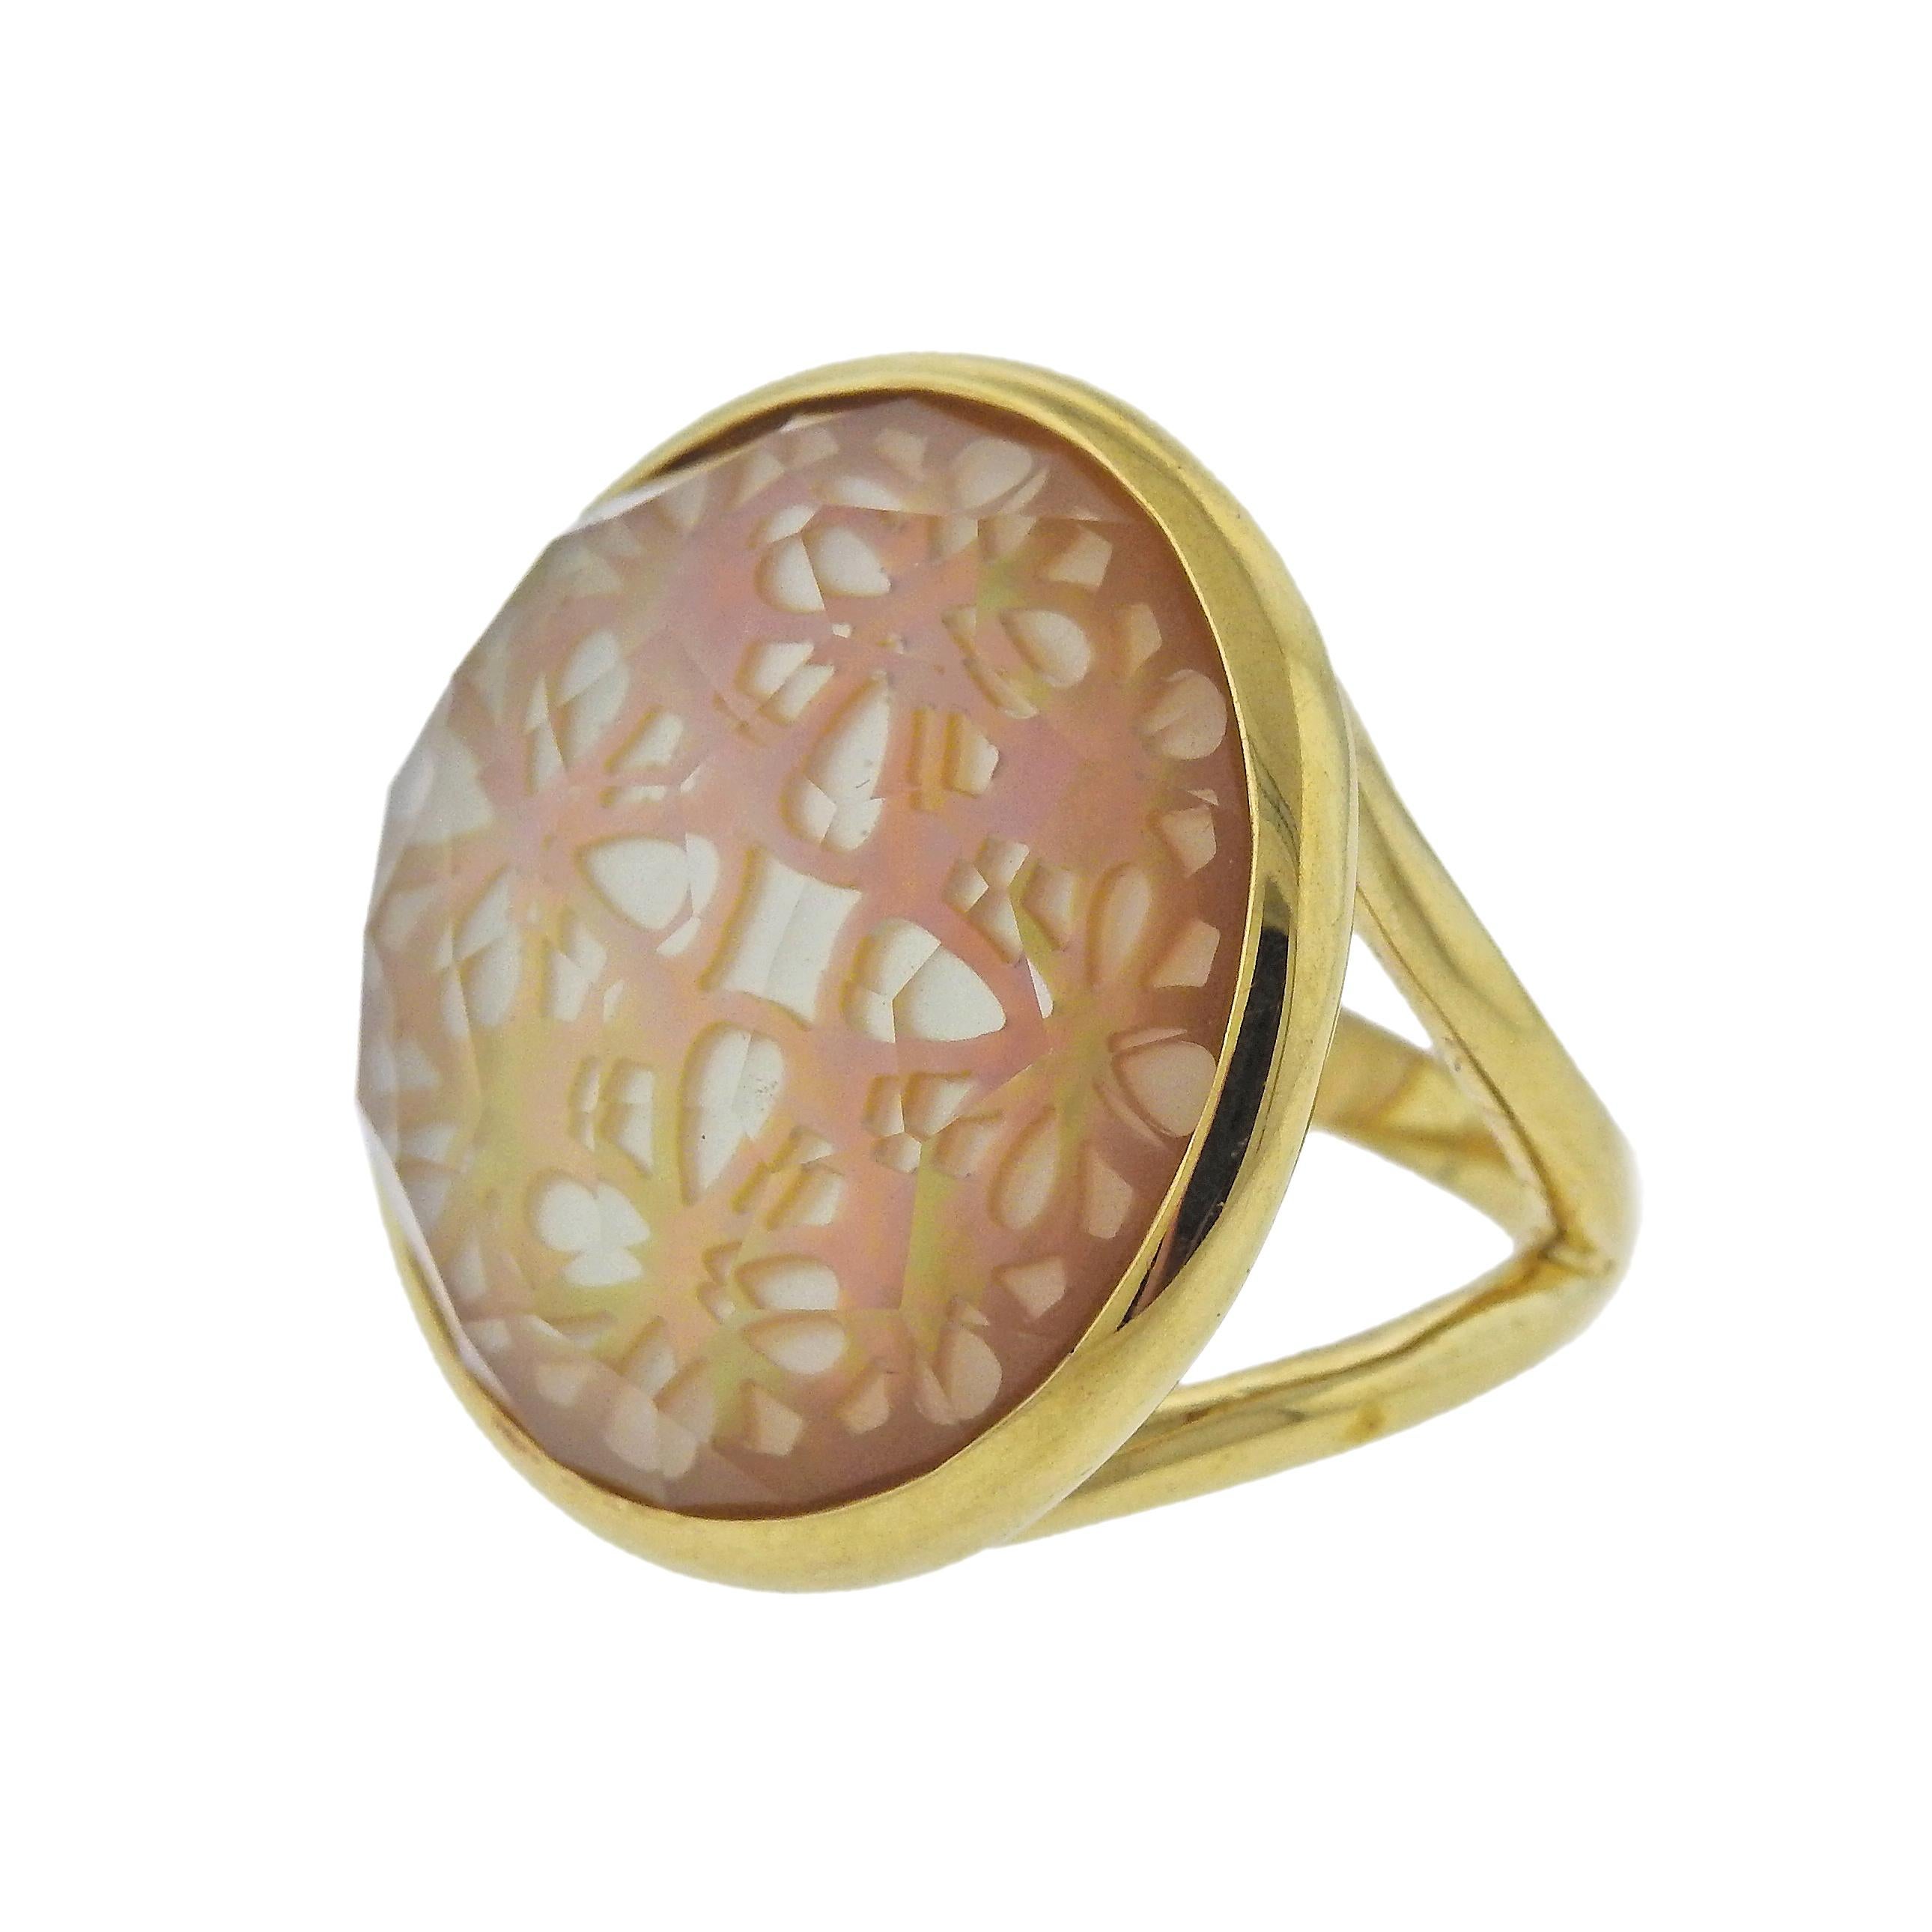 18k gold large ring by Ippolita, set with cut out mother of pearl, covered with quartz. Ring size - 7 1/4, ring top - 25mm in diameter , weighs 17.1 grams. Marked Ippolita and 18k. Retail $2595. Come with Pouch.